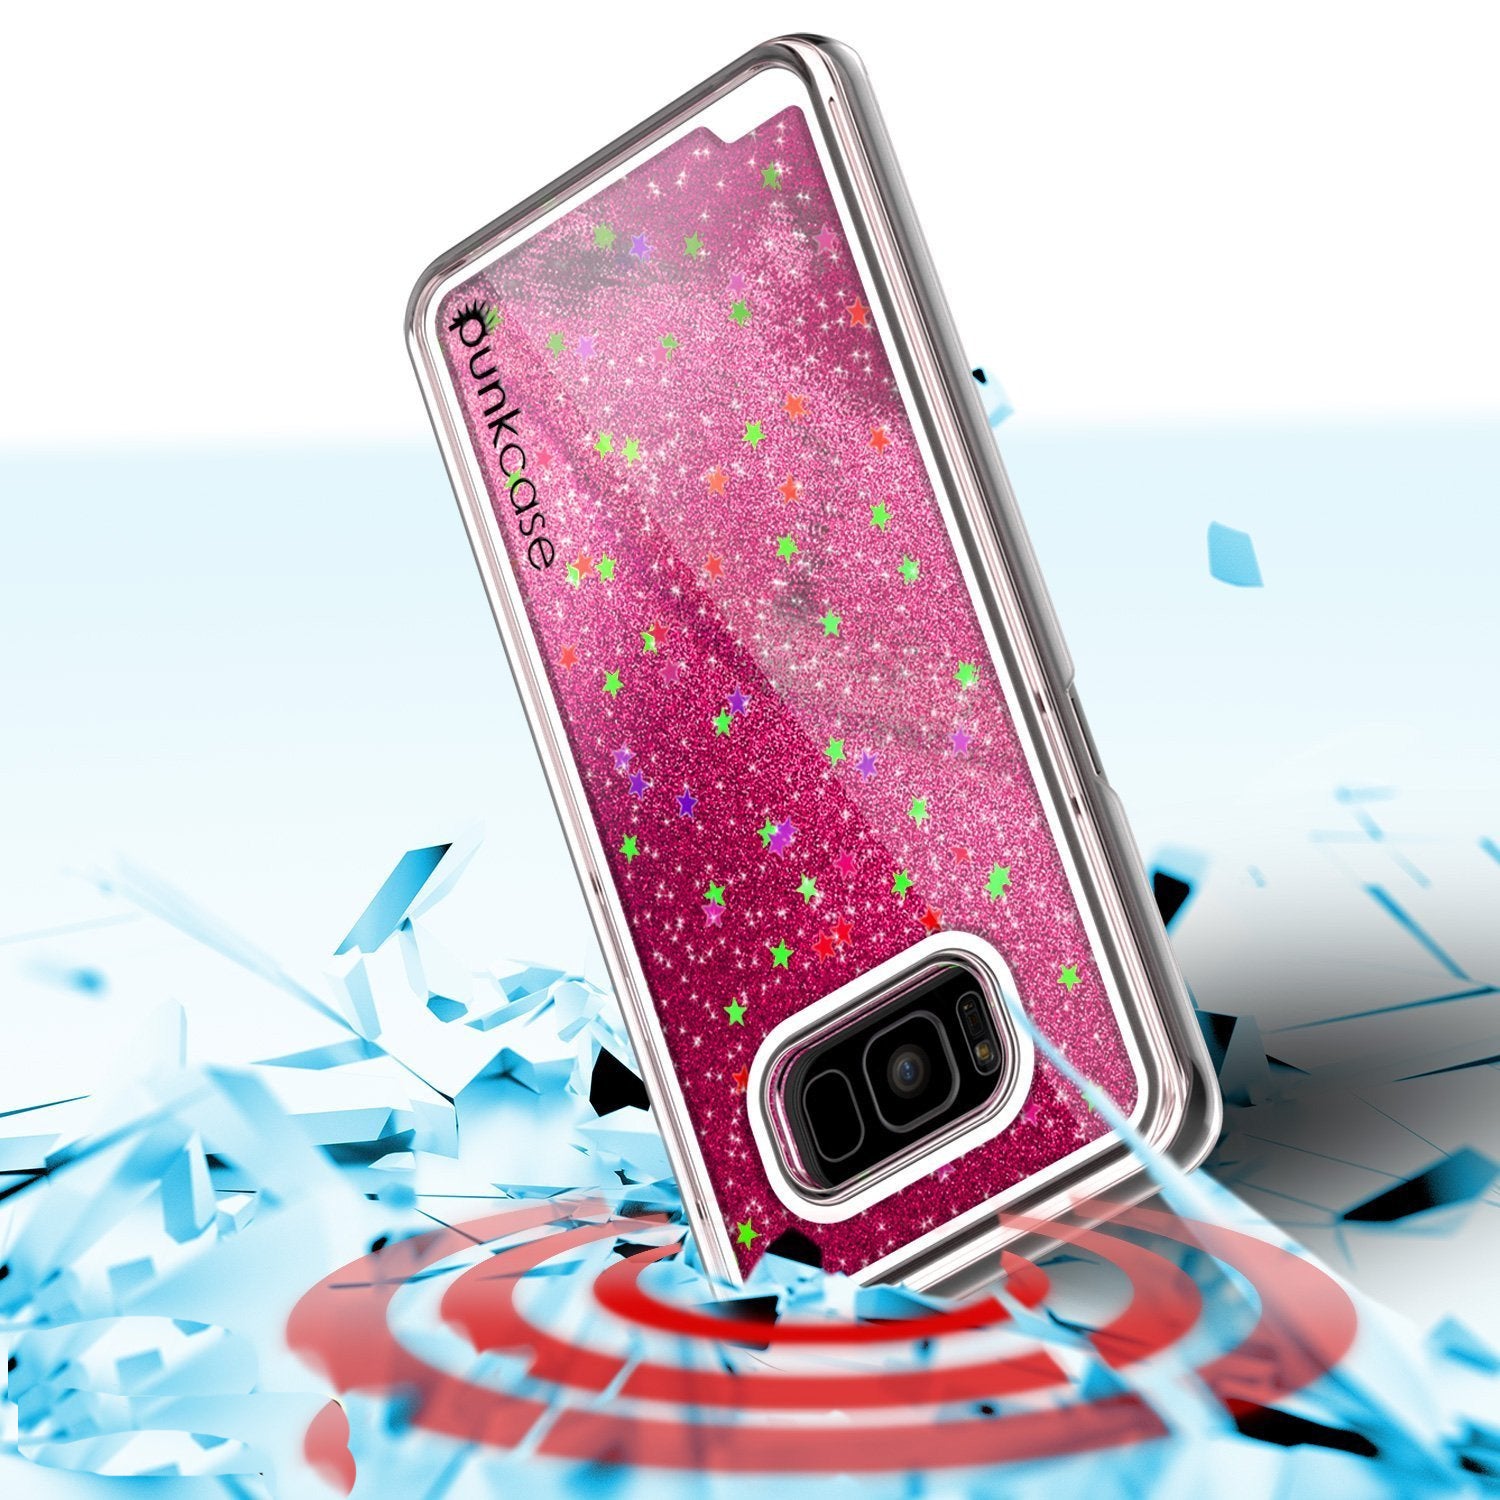 Galaxy S8 Plus Dual-Layer Screen Protective Glitter Case [Pink]